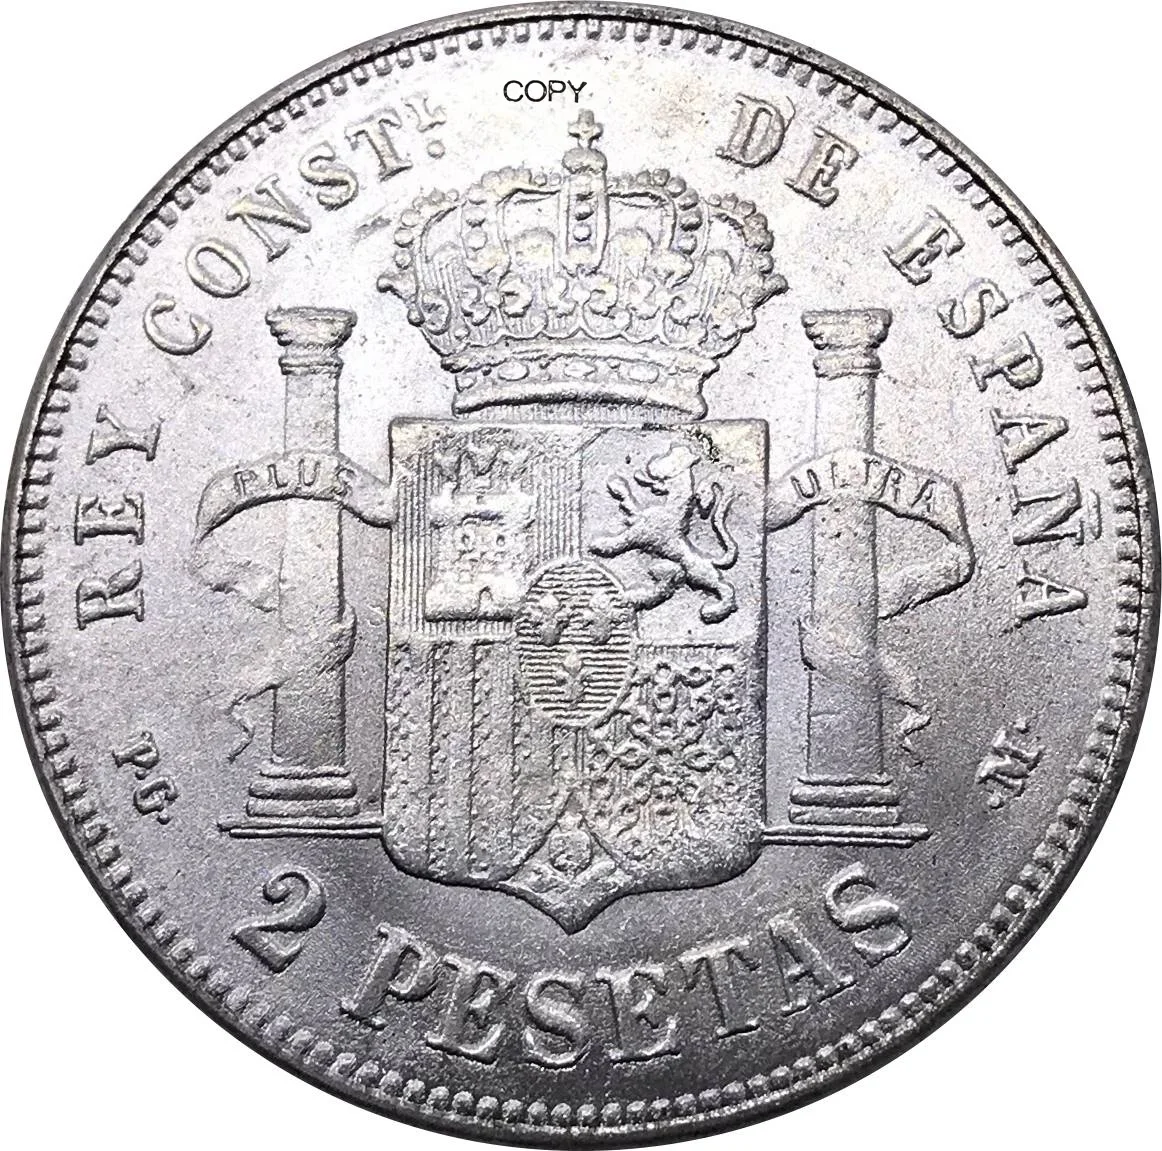 

Spanish 1891 PG M Spain 2 Pesetas - Alfonso XIII 1st Portrait Cupronickel Plated Silver Metal Souvenir Gift Collectible Coins